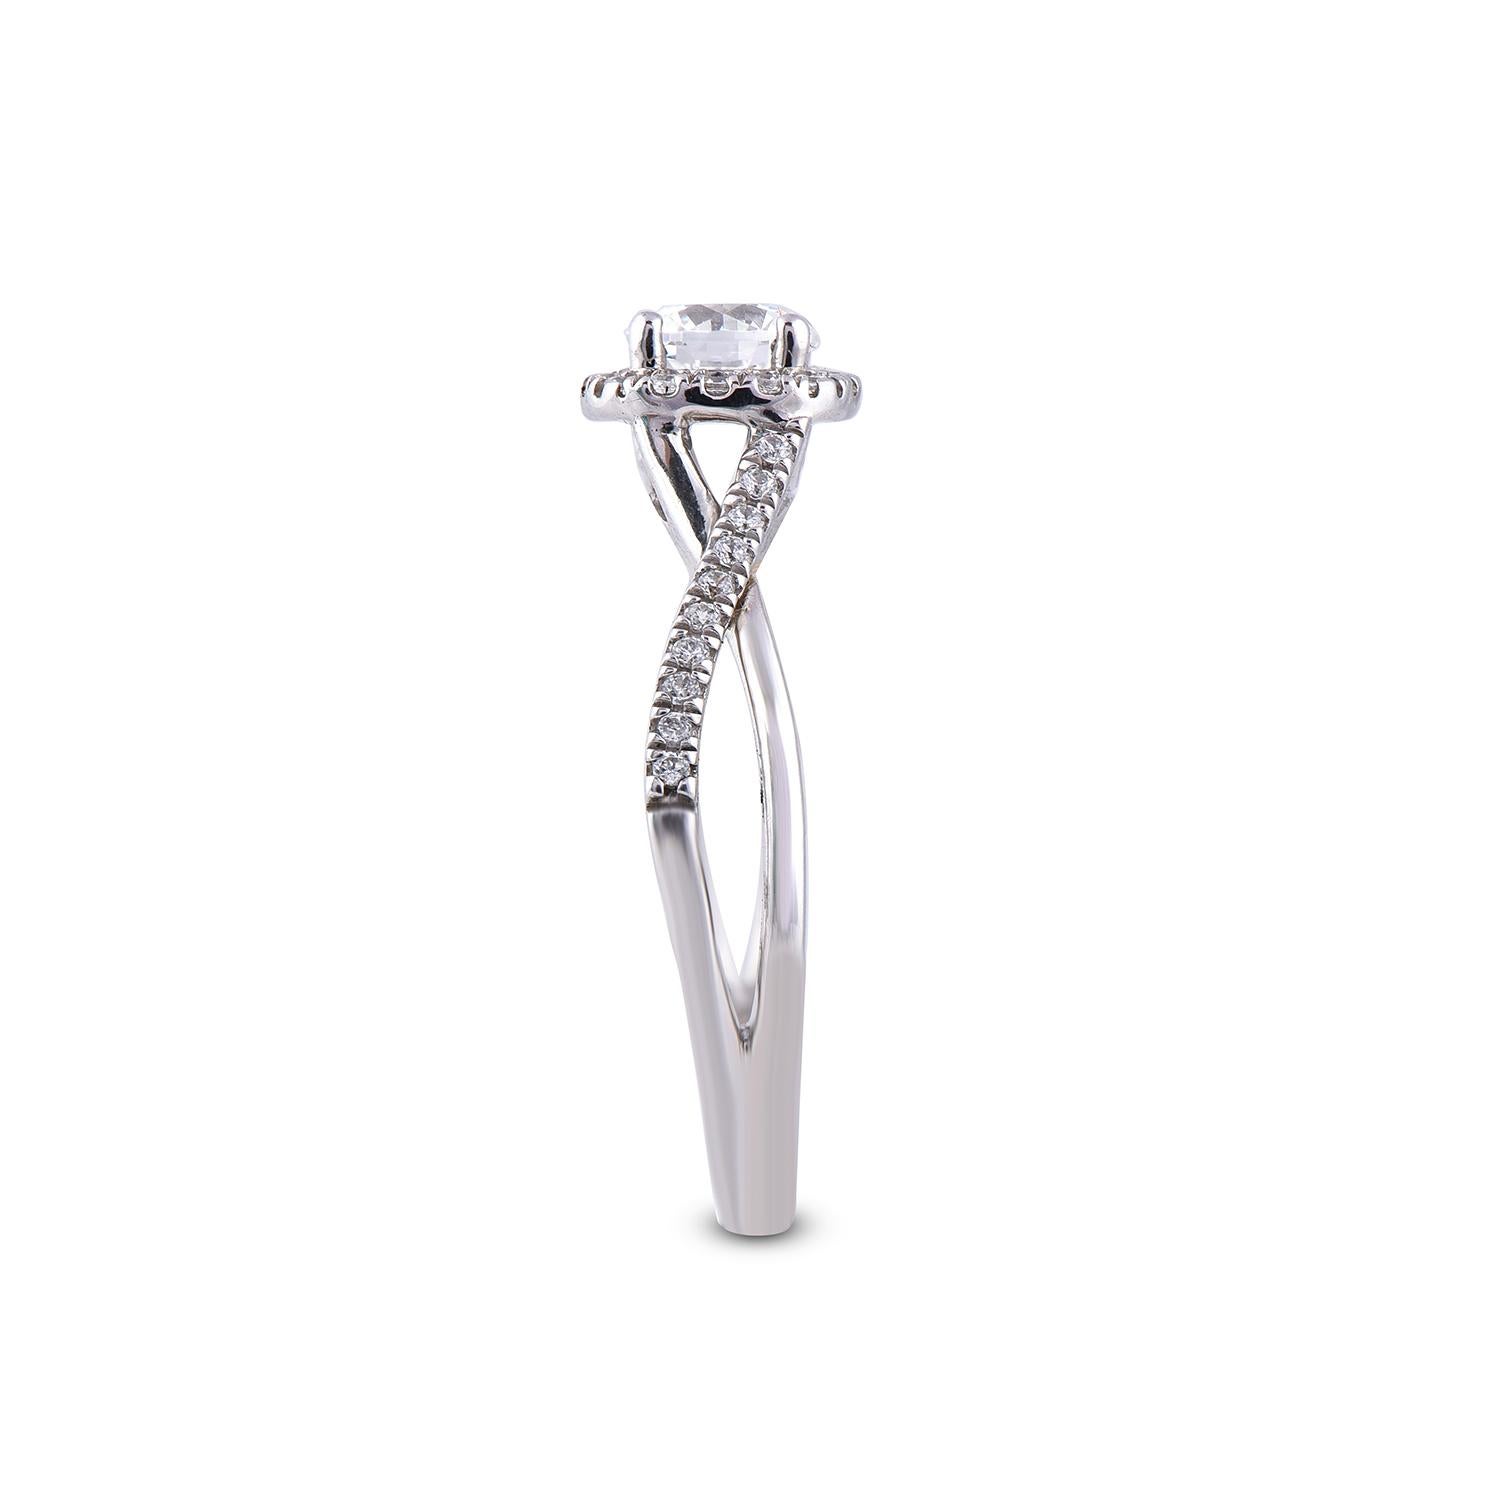 TJD 0.75 Carat Round Diamond 14 Karat White Gold Halo Crisscross Fashion Ring In New Condition For Sale In New York, NY